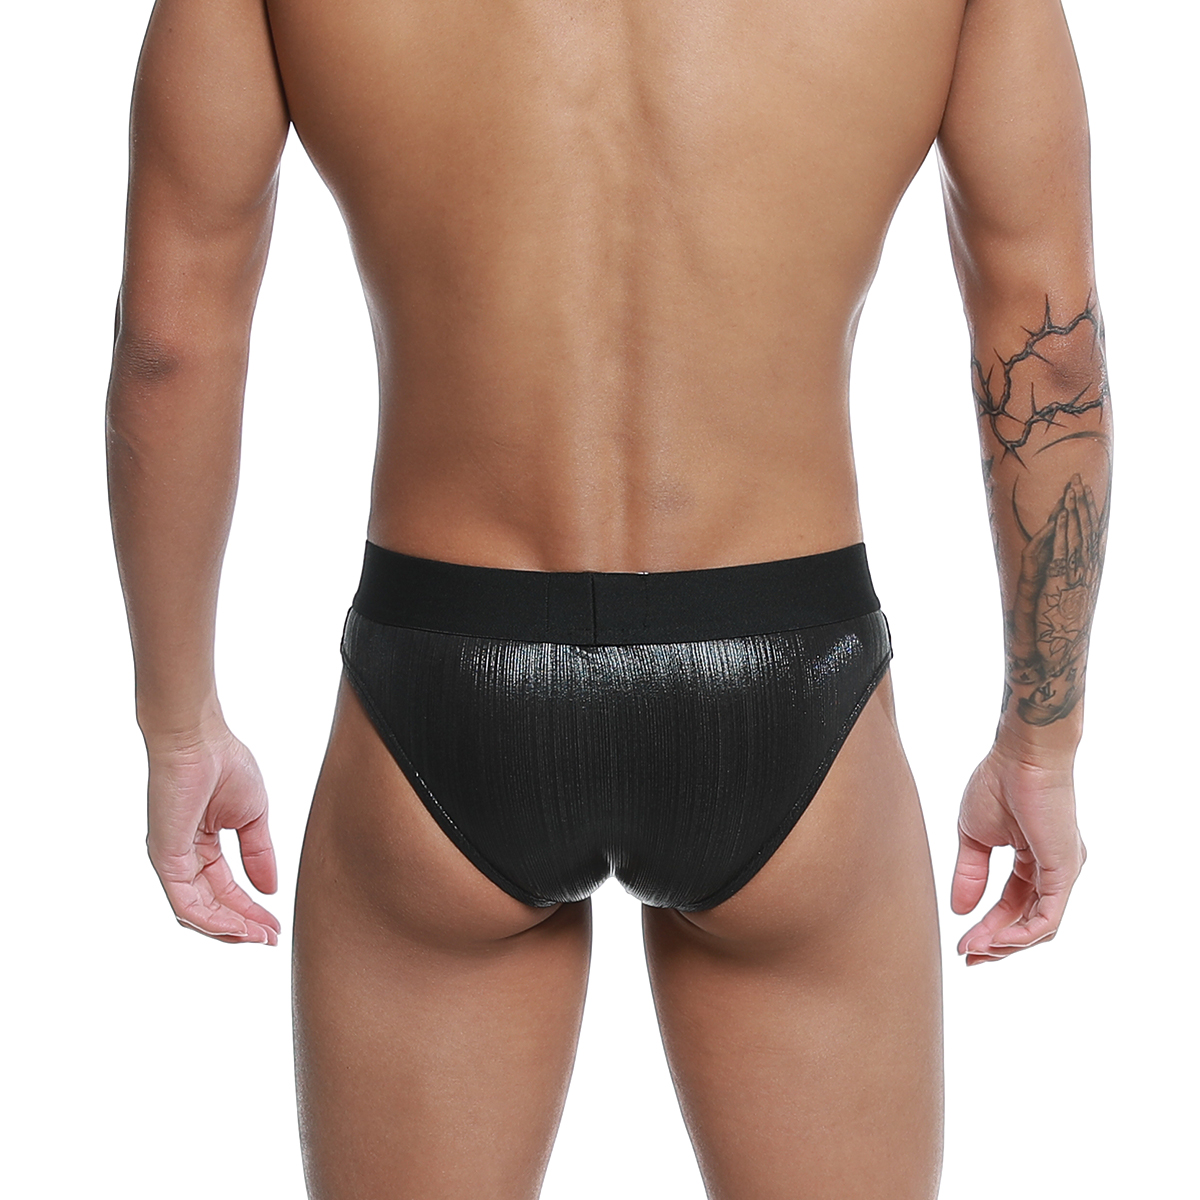 [MetroMuscleWear] Buckle Competition Suit (4974-24)